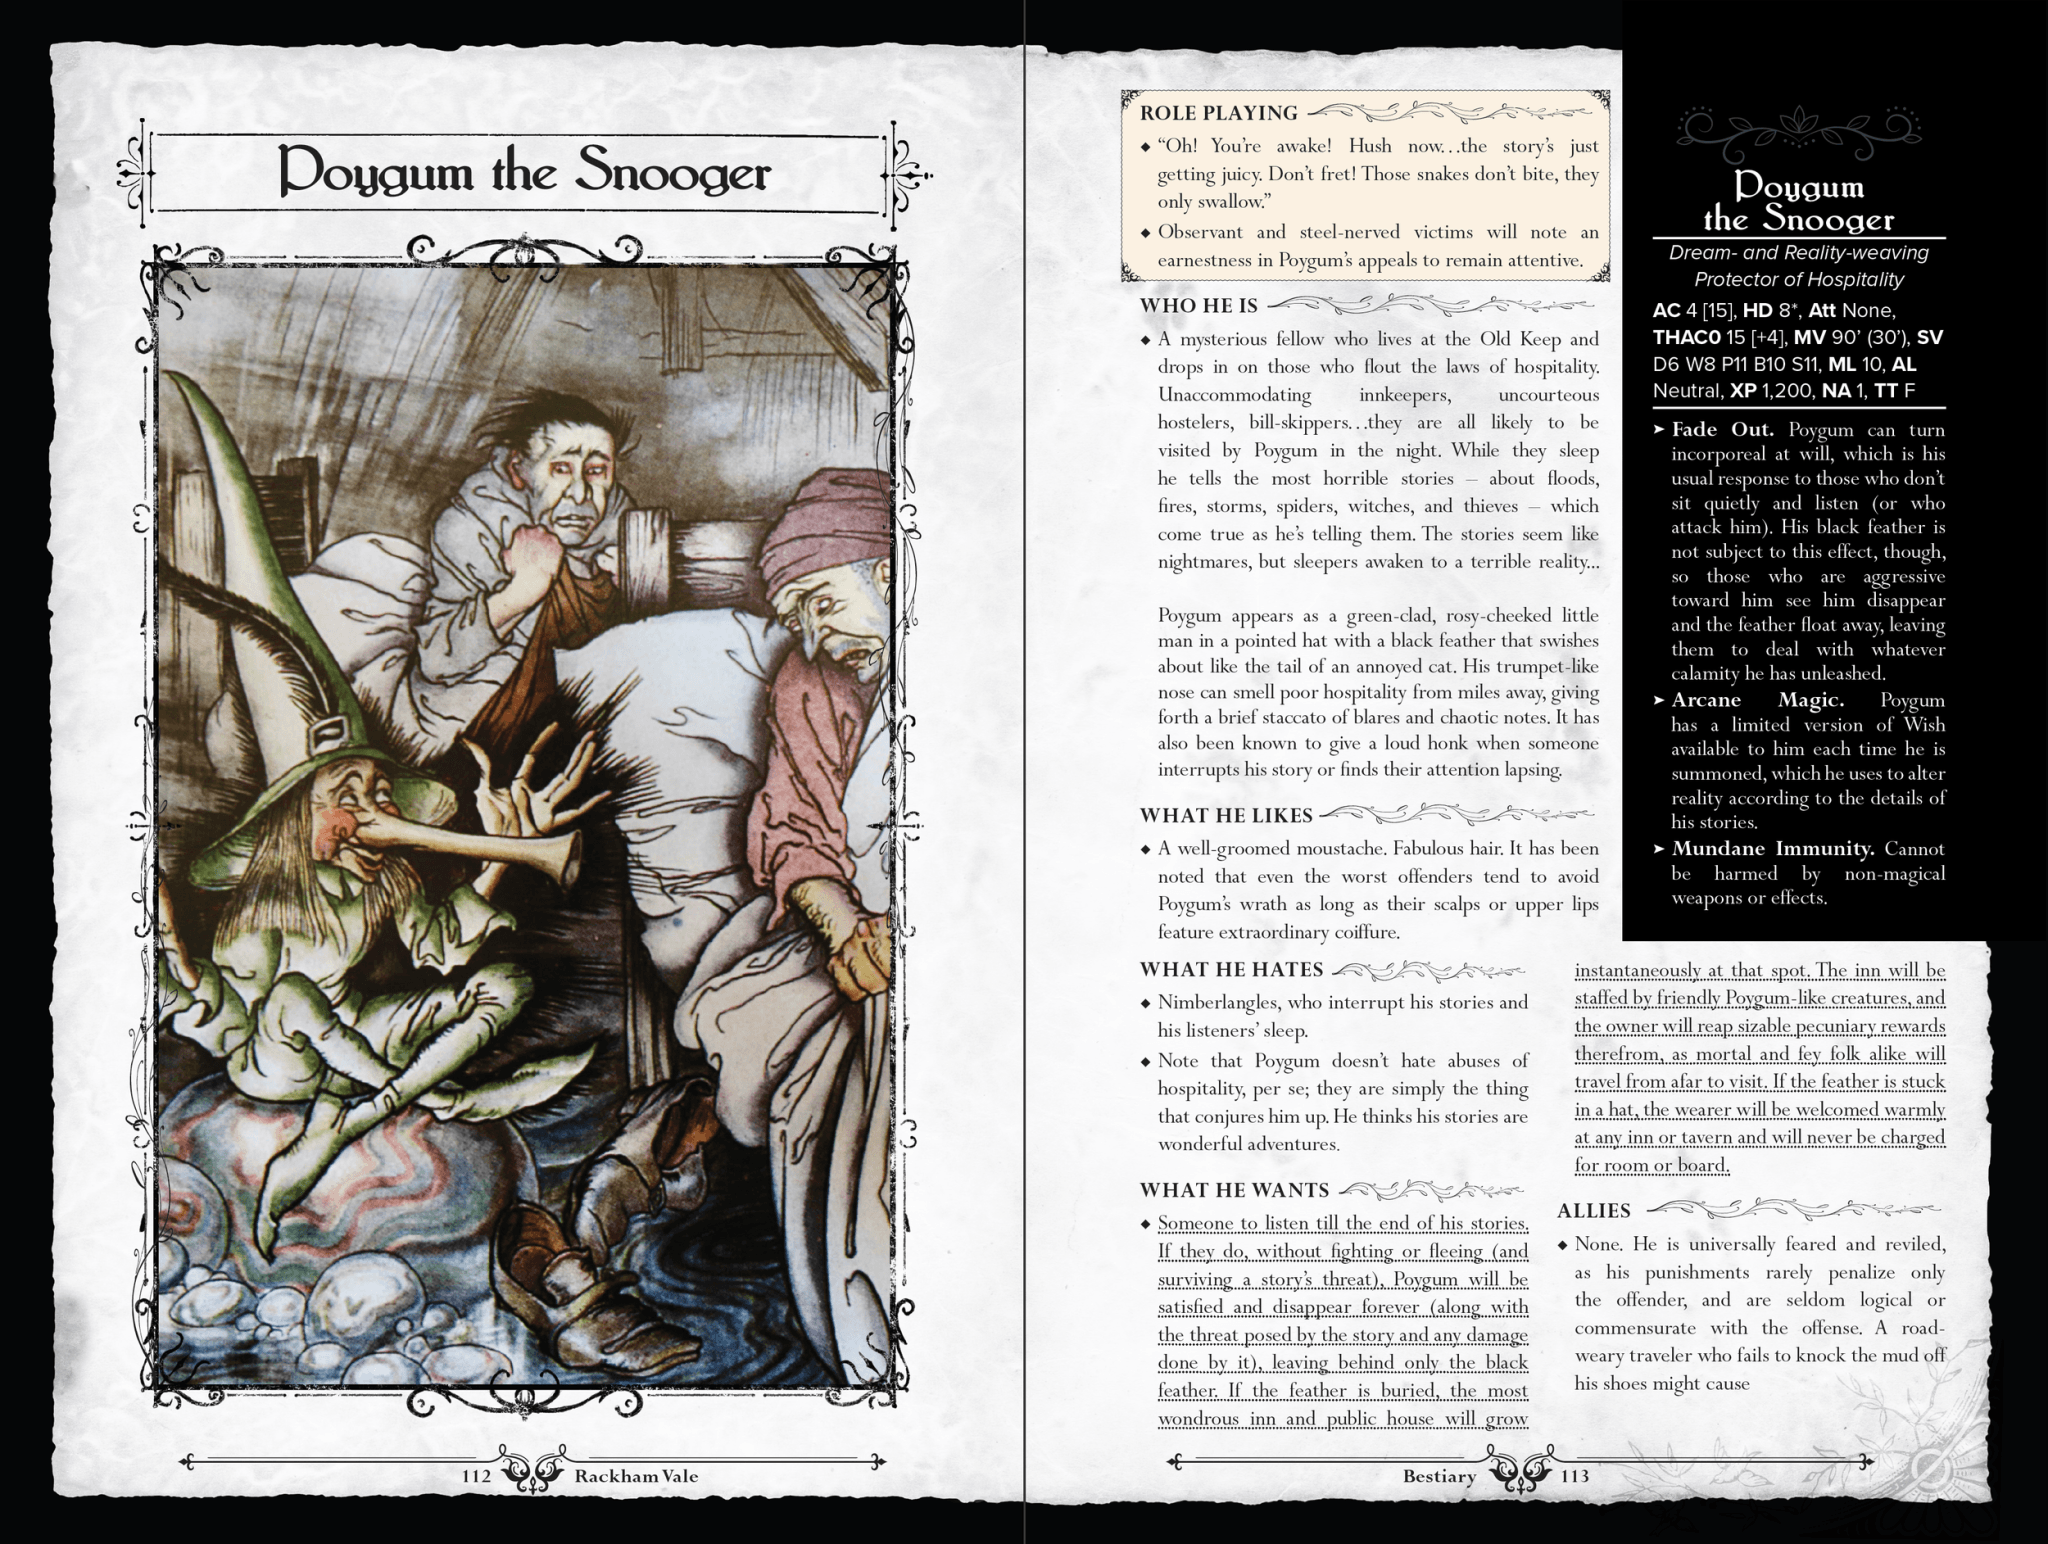 Rackham Vale: Paintbox Edition Hardcover - Exalted Funeral